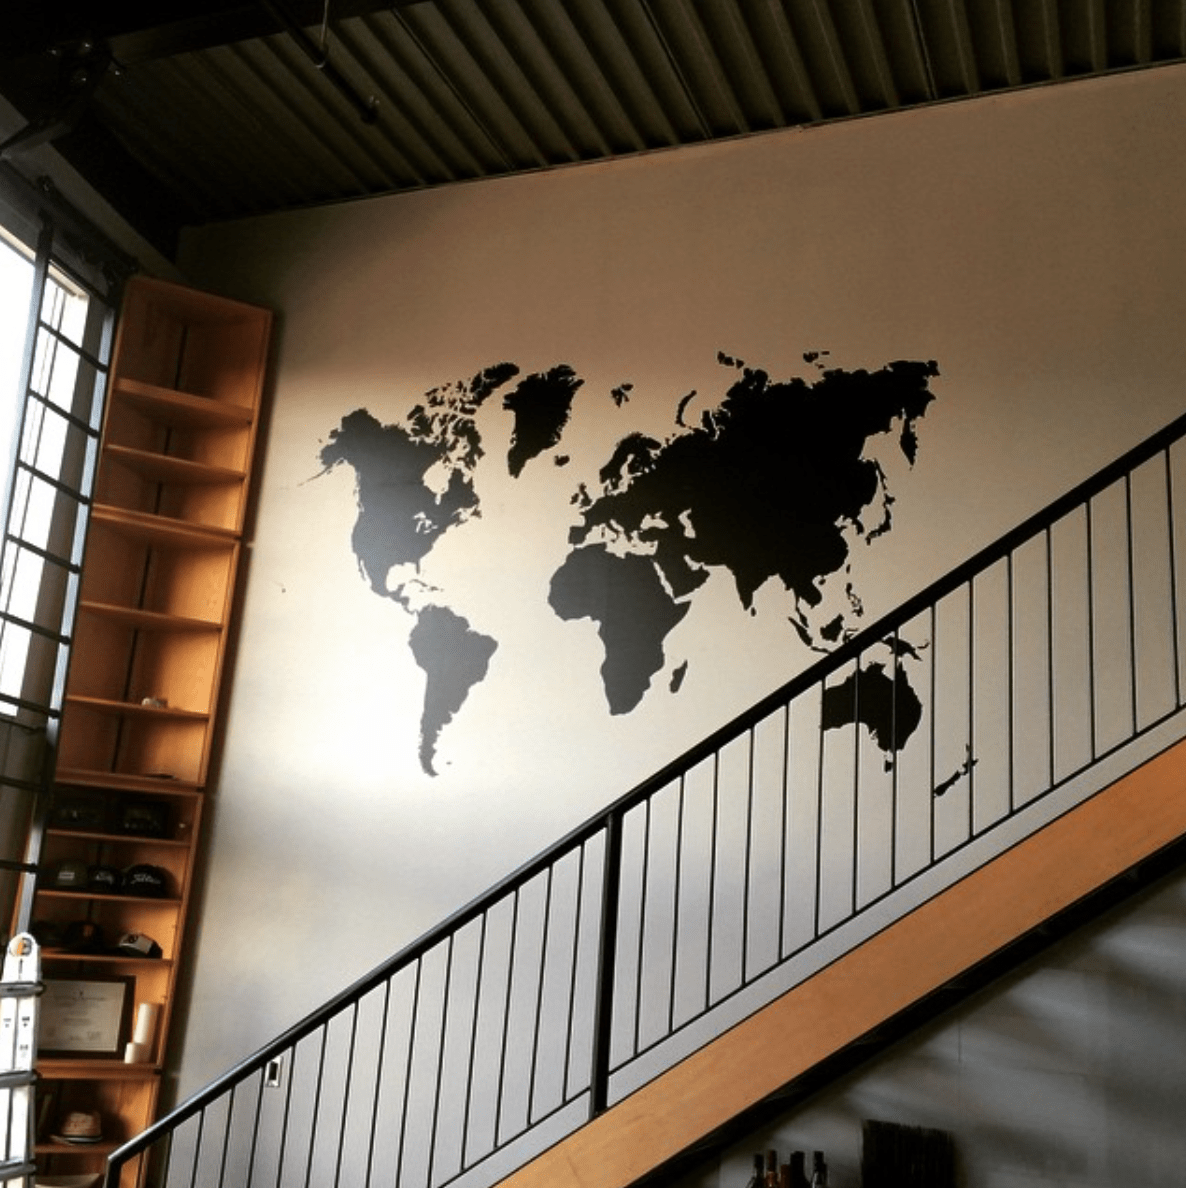 A black world map wall decal on a white wall.